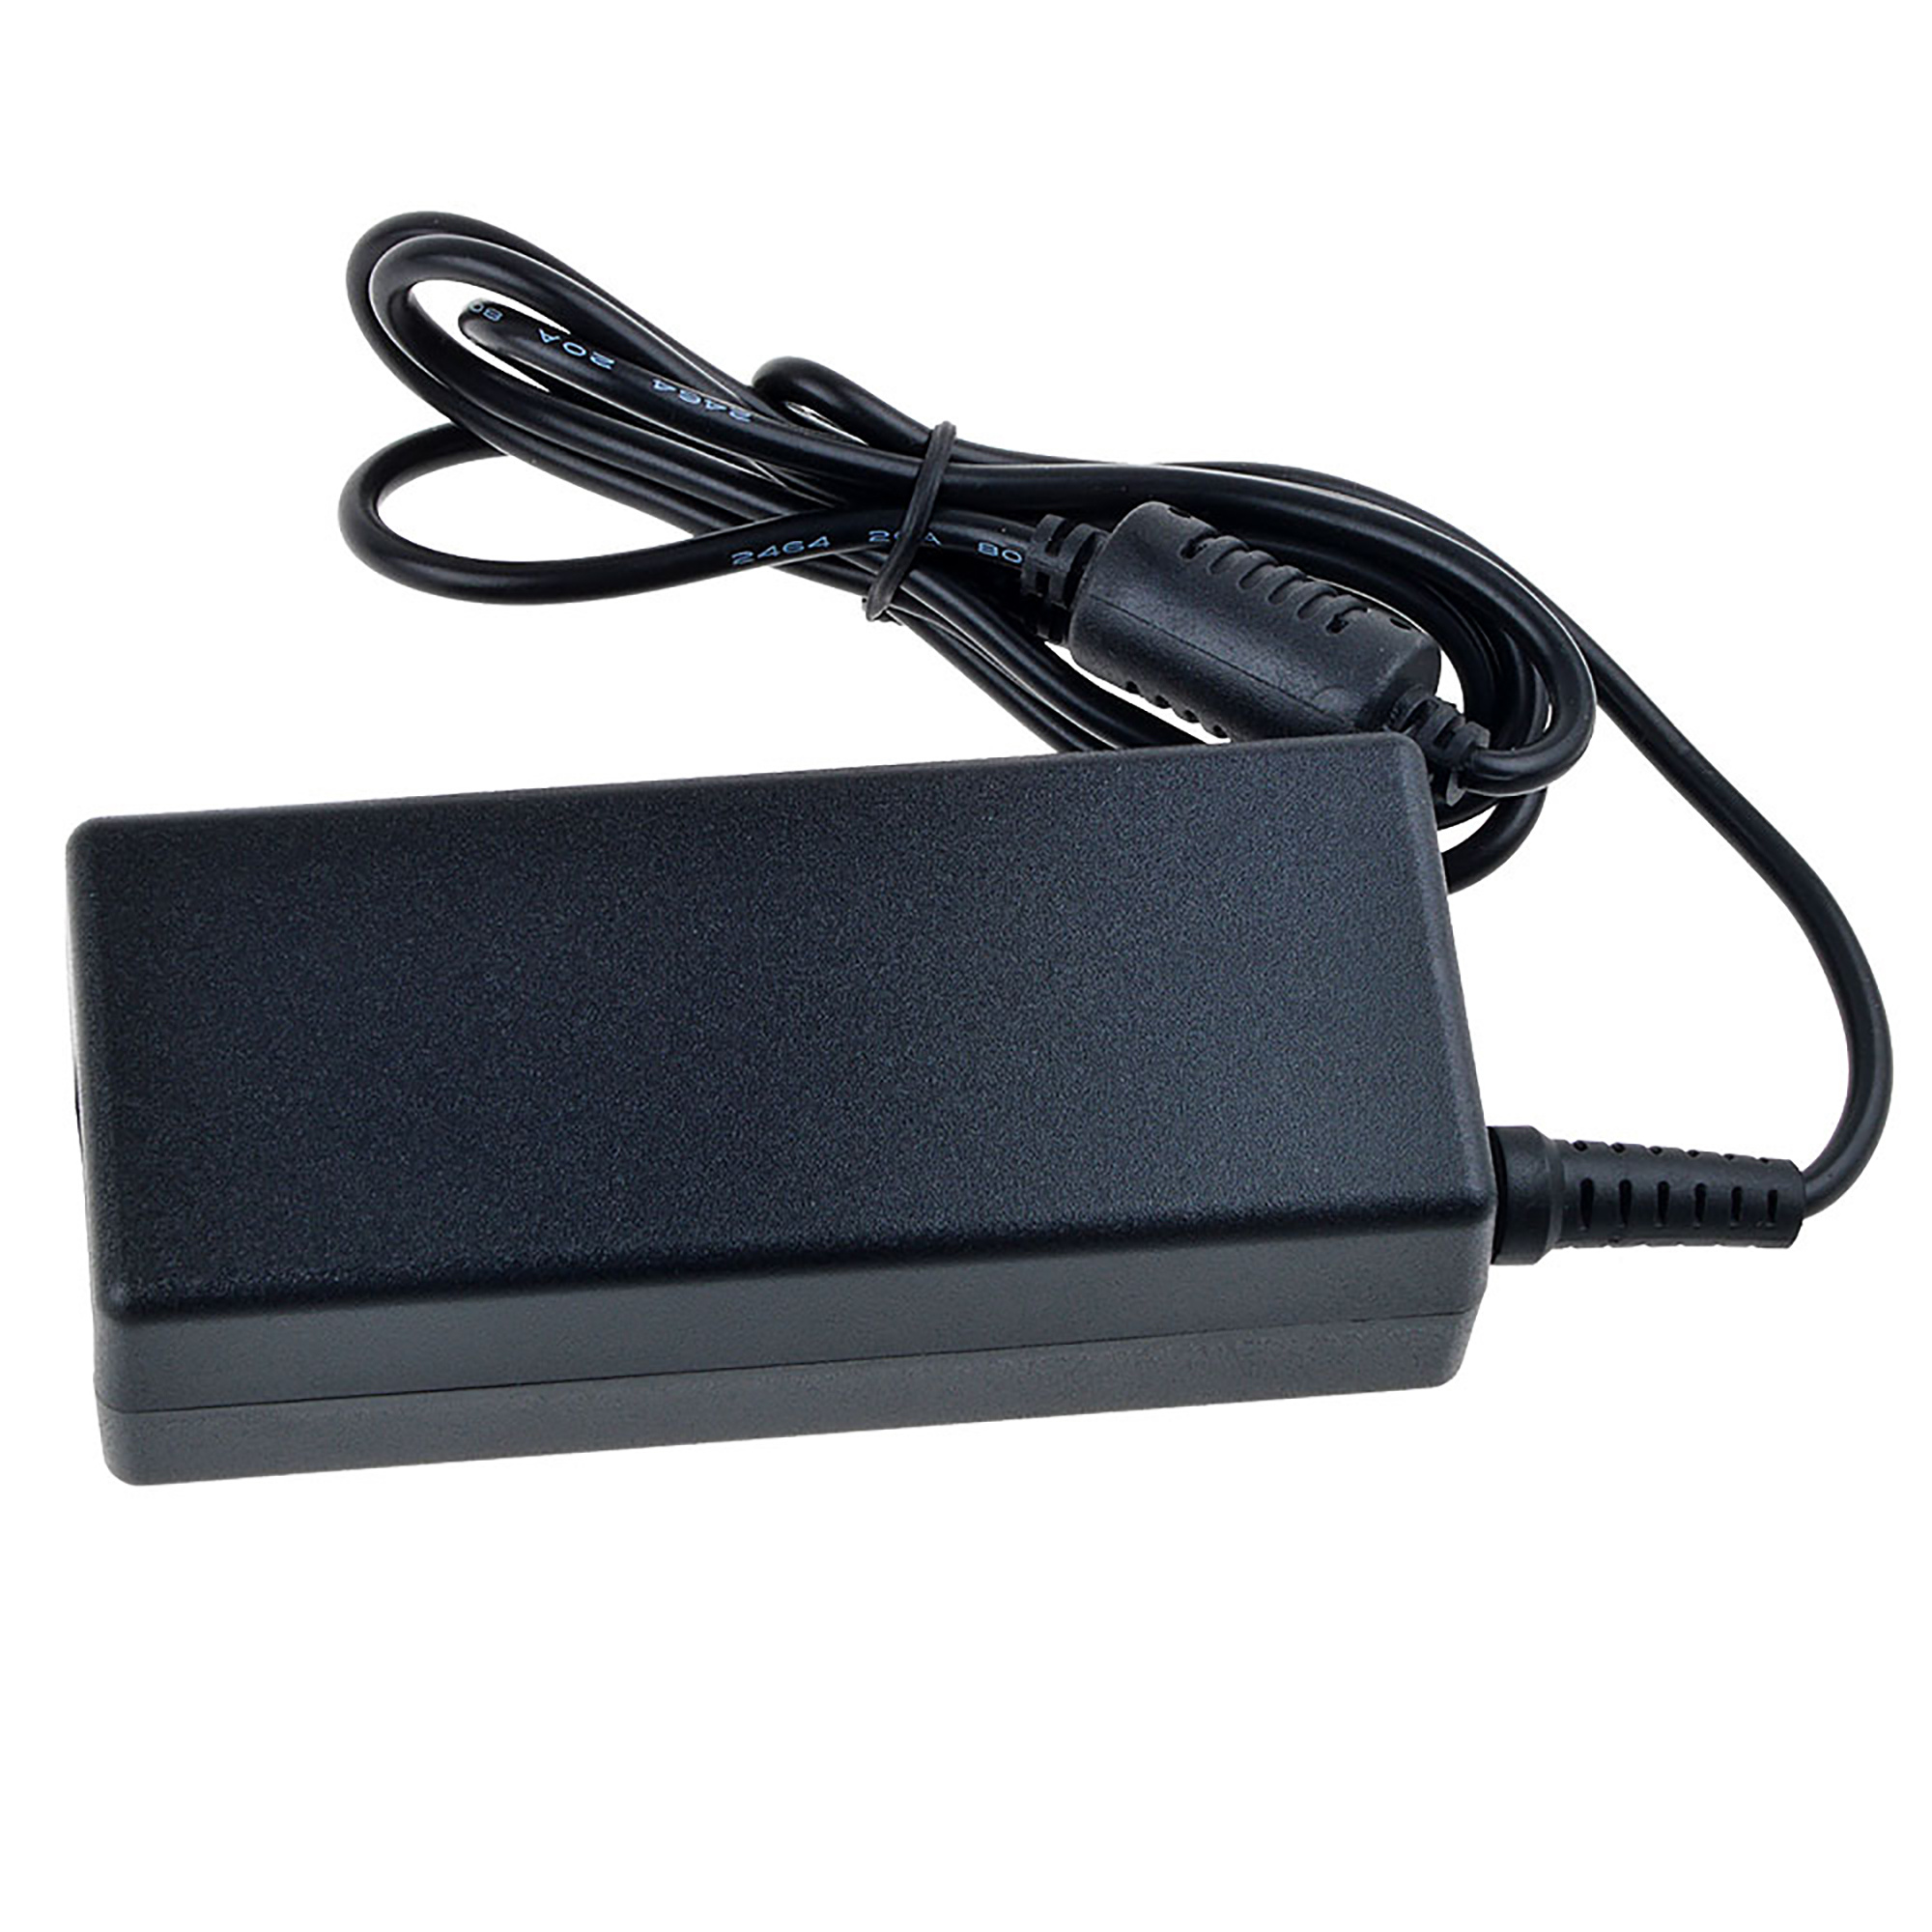 PKPOWER AC DC Adapter Replacement for LG SL6Y 3.1 Channel High-Resolution Sound Bar SoundBar Power - image 4 of 5